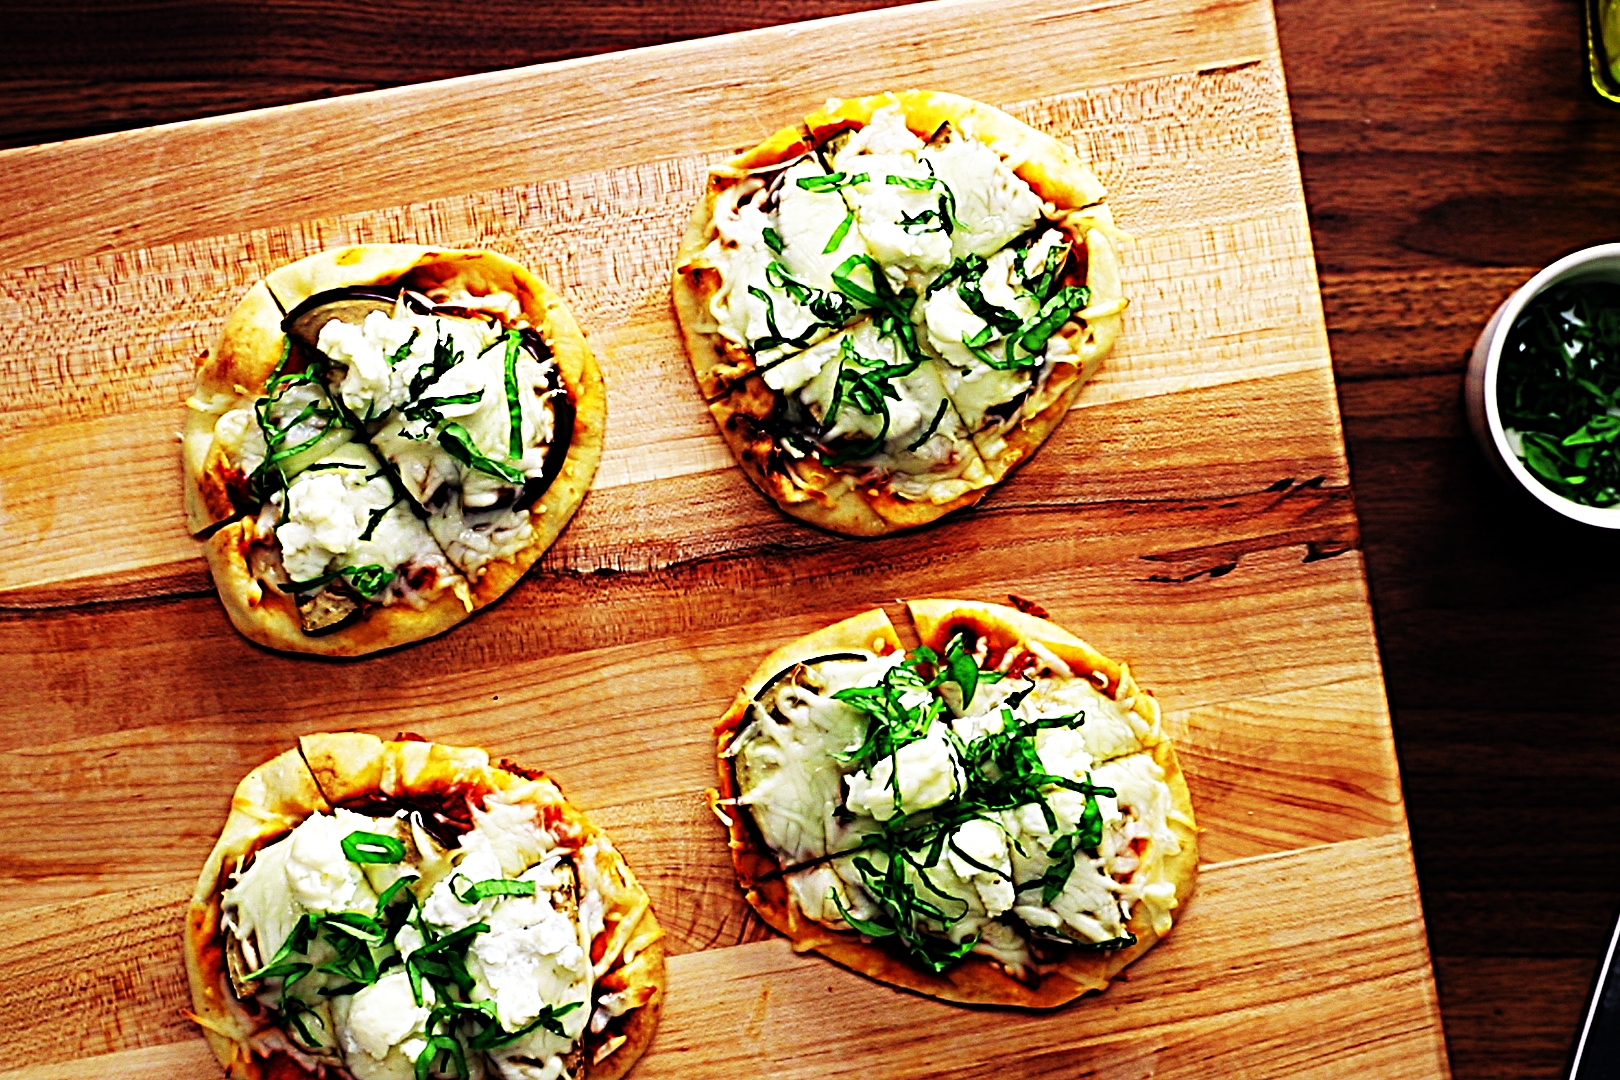 Stupid-Easy Recipe for Quick & Easy Eggplant Naan Pizzas (#1 Top-Rated)